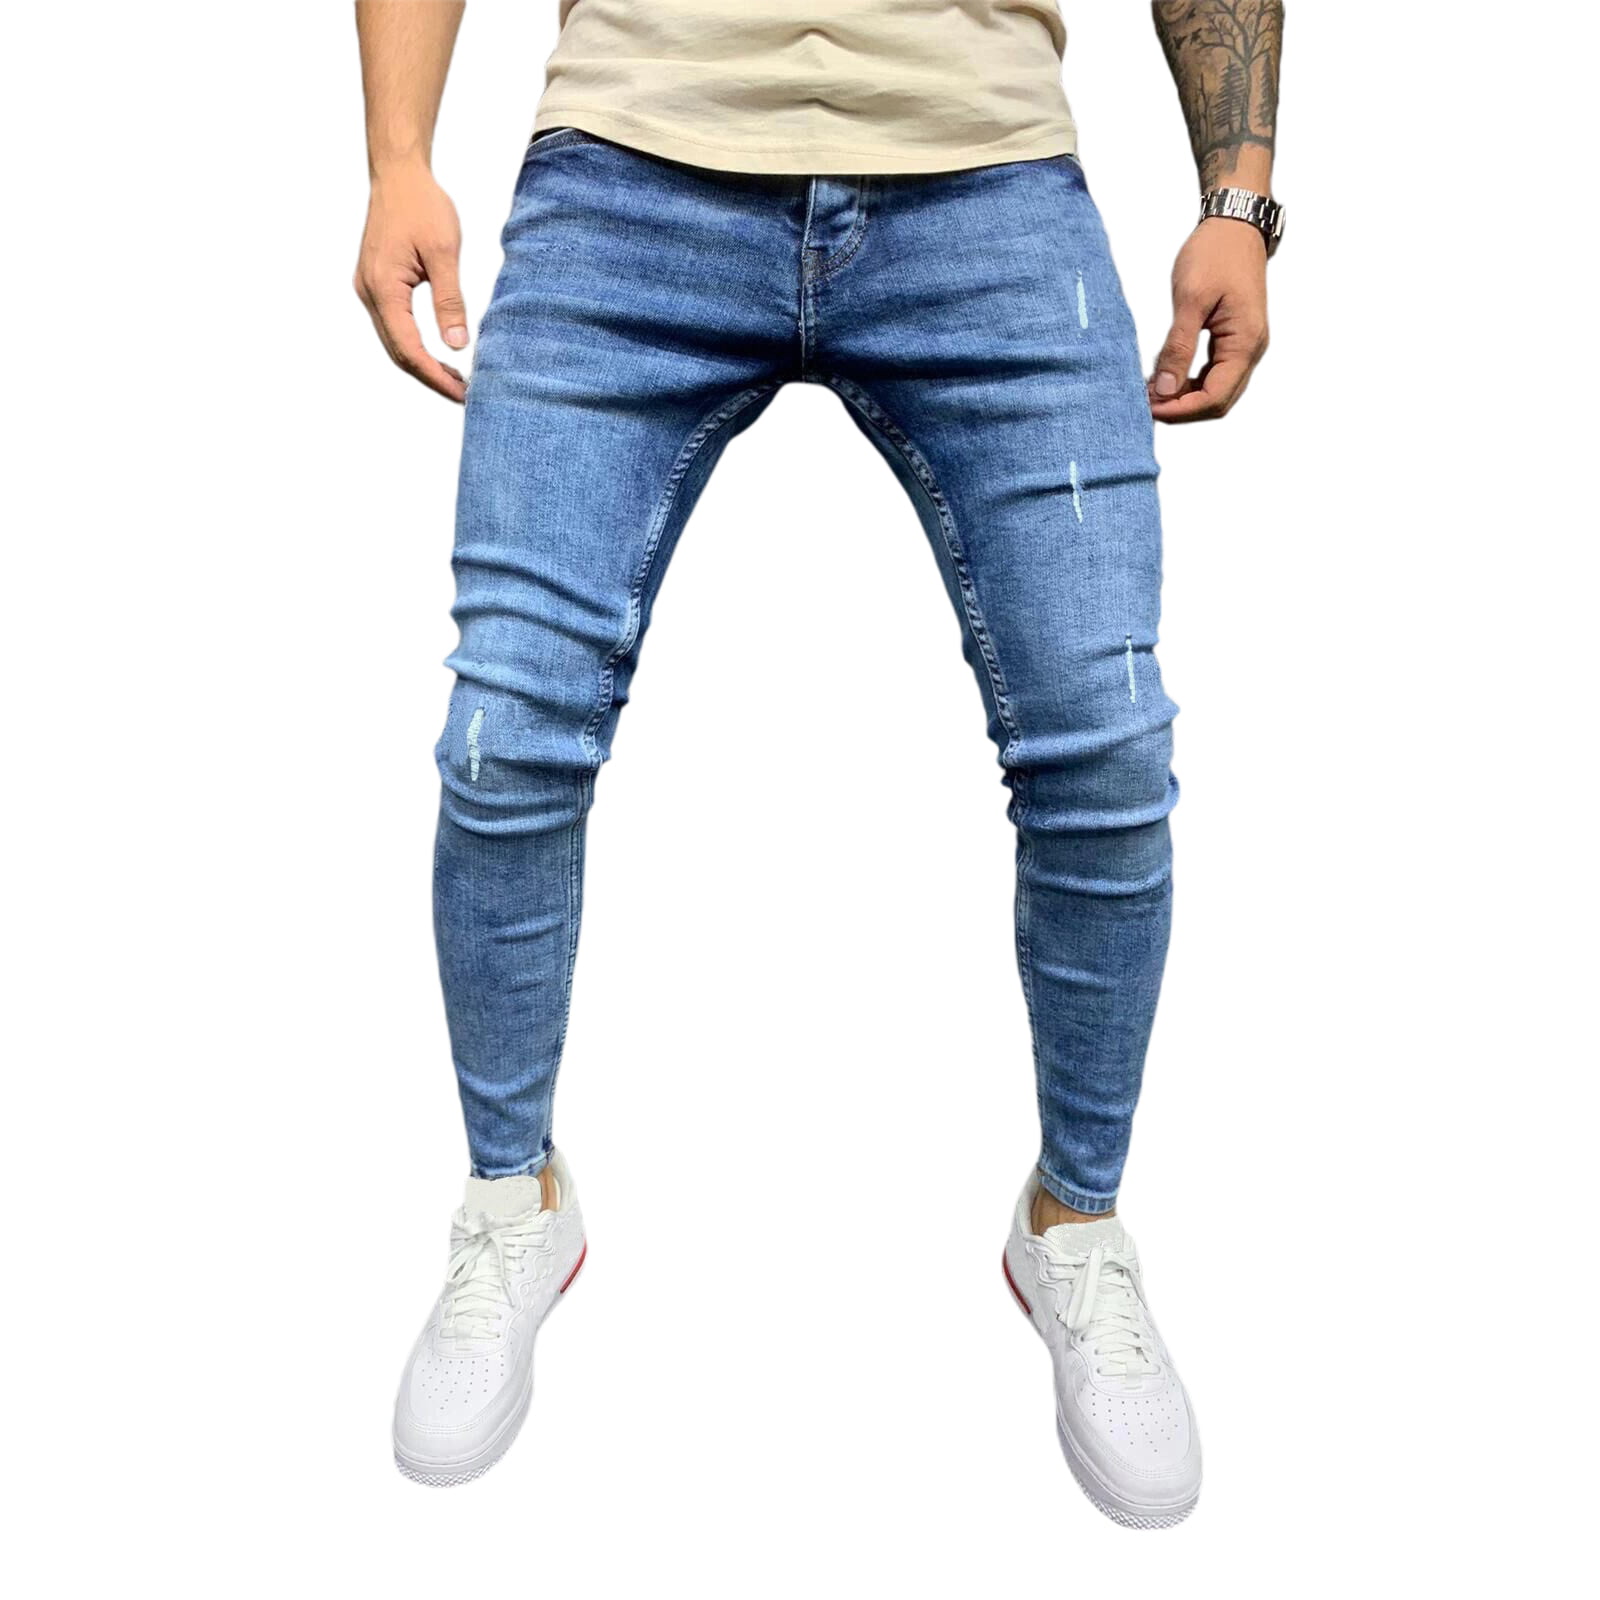 Stylish Men's Korean Jeans Slim Fit Skinny Lace Up Pencil Casual Trousers Pants 